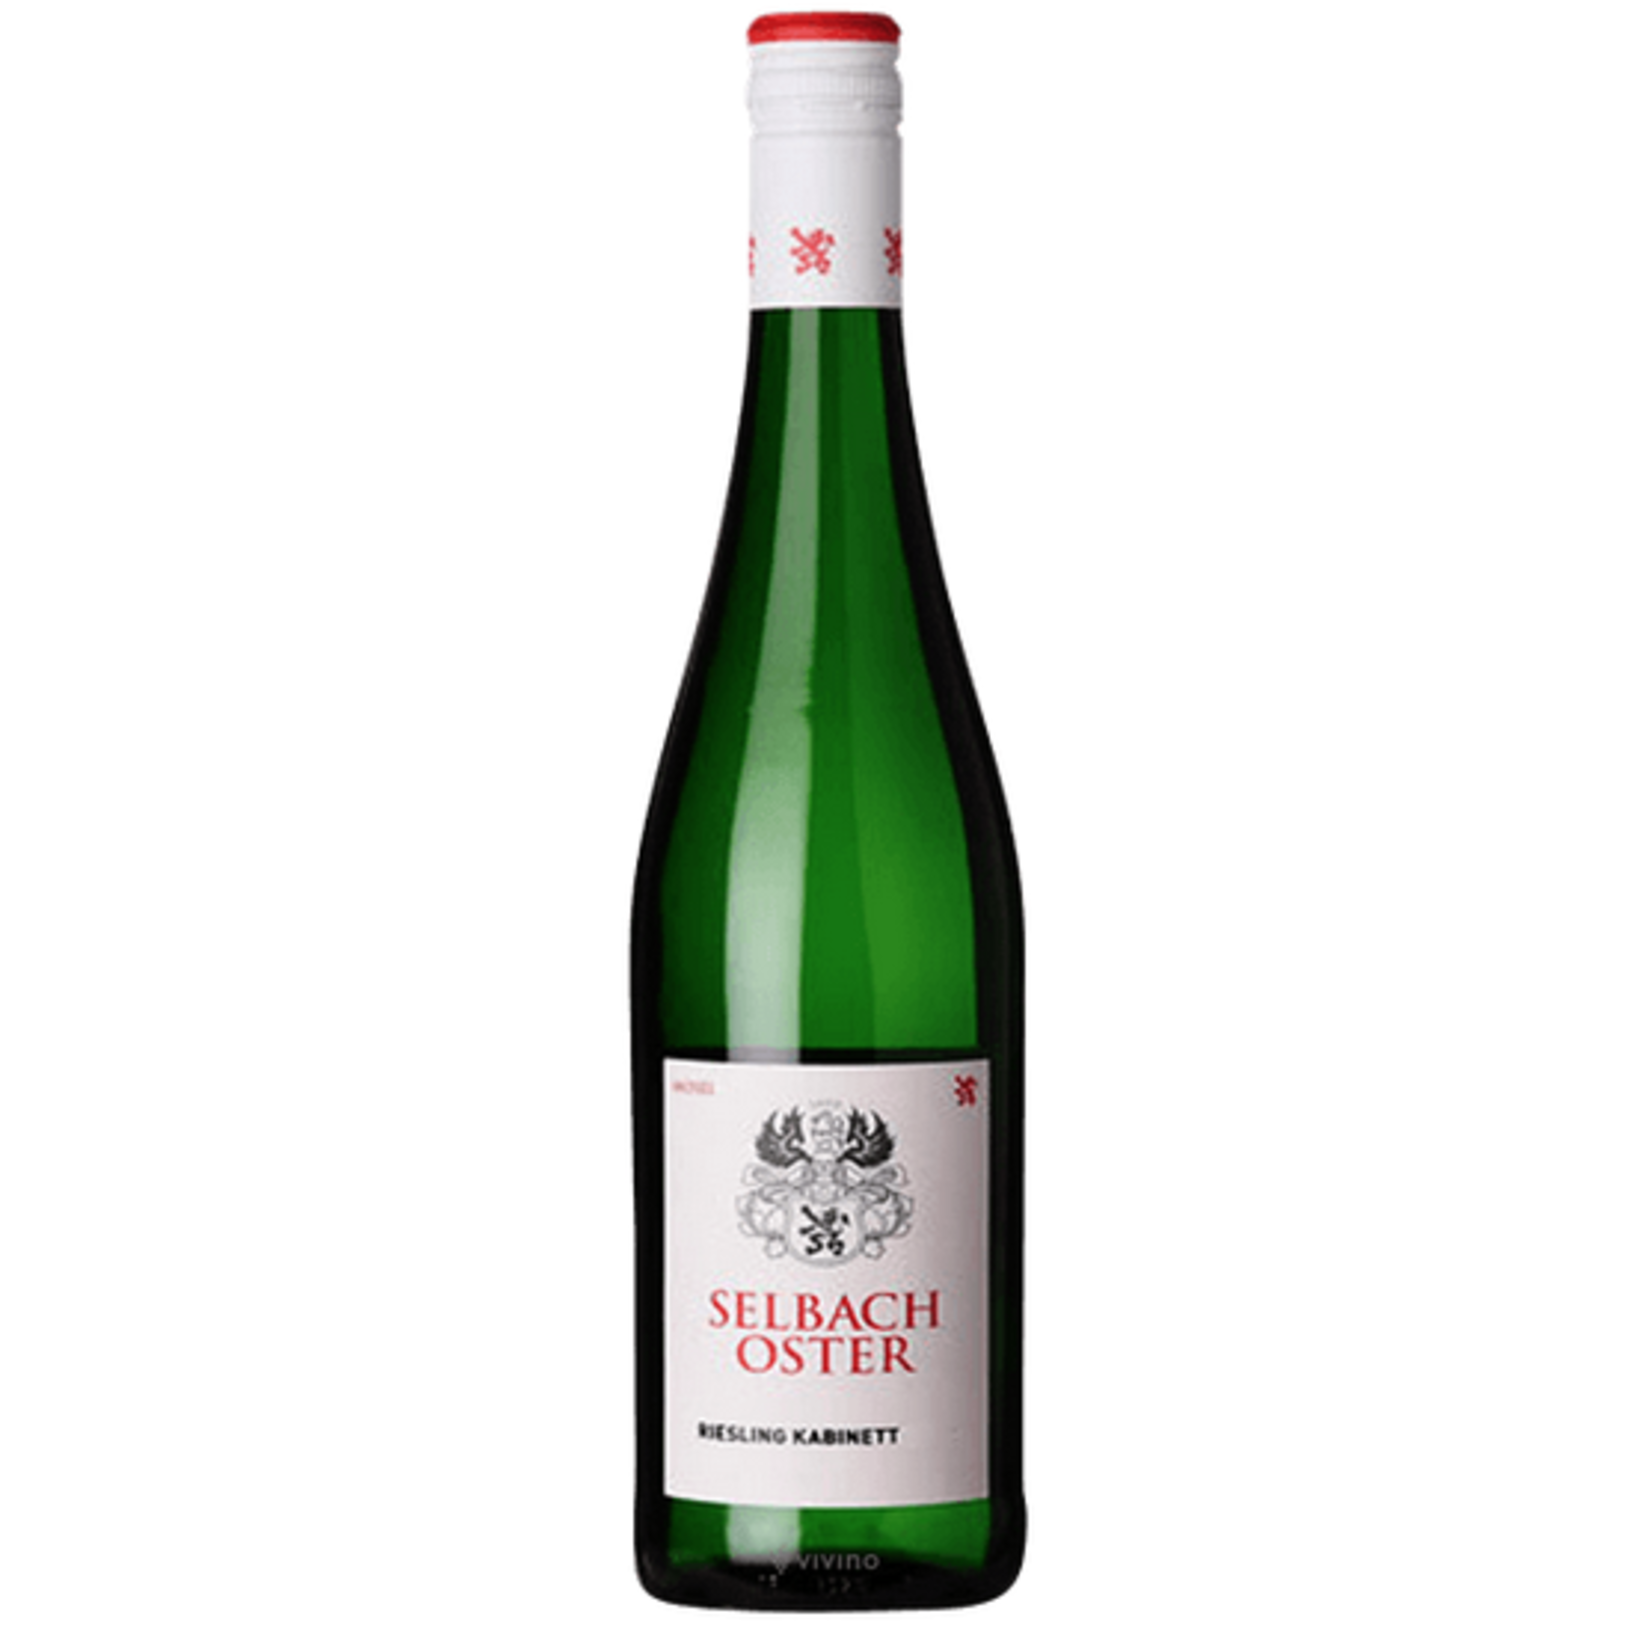 Selbach Oster Selbach-Oster Riesling Kabinett 2019  Mosel, Germany